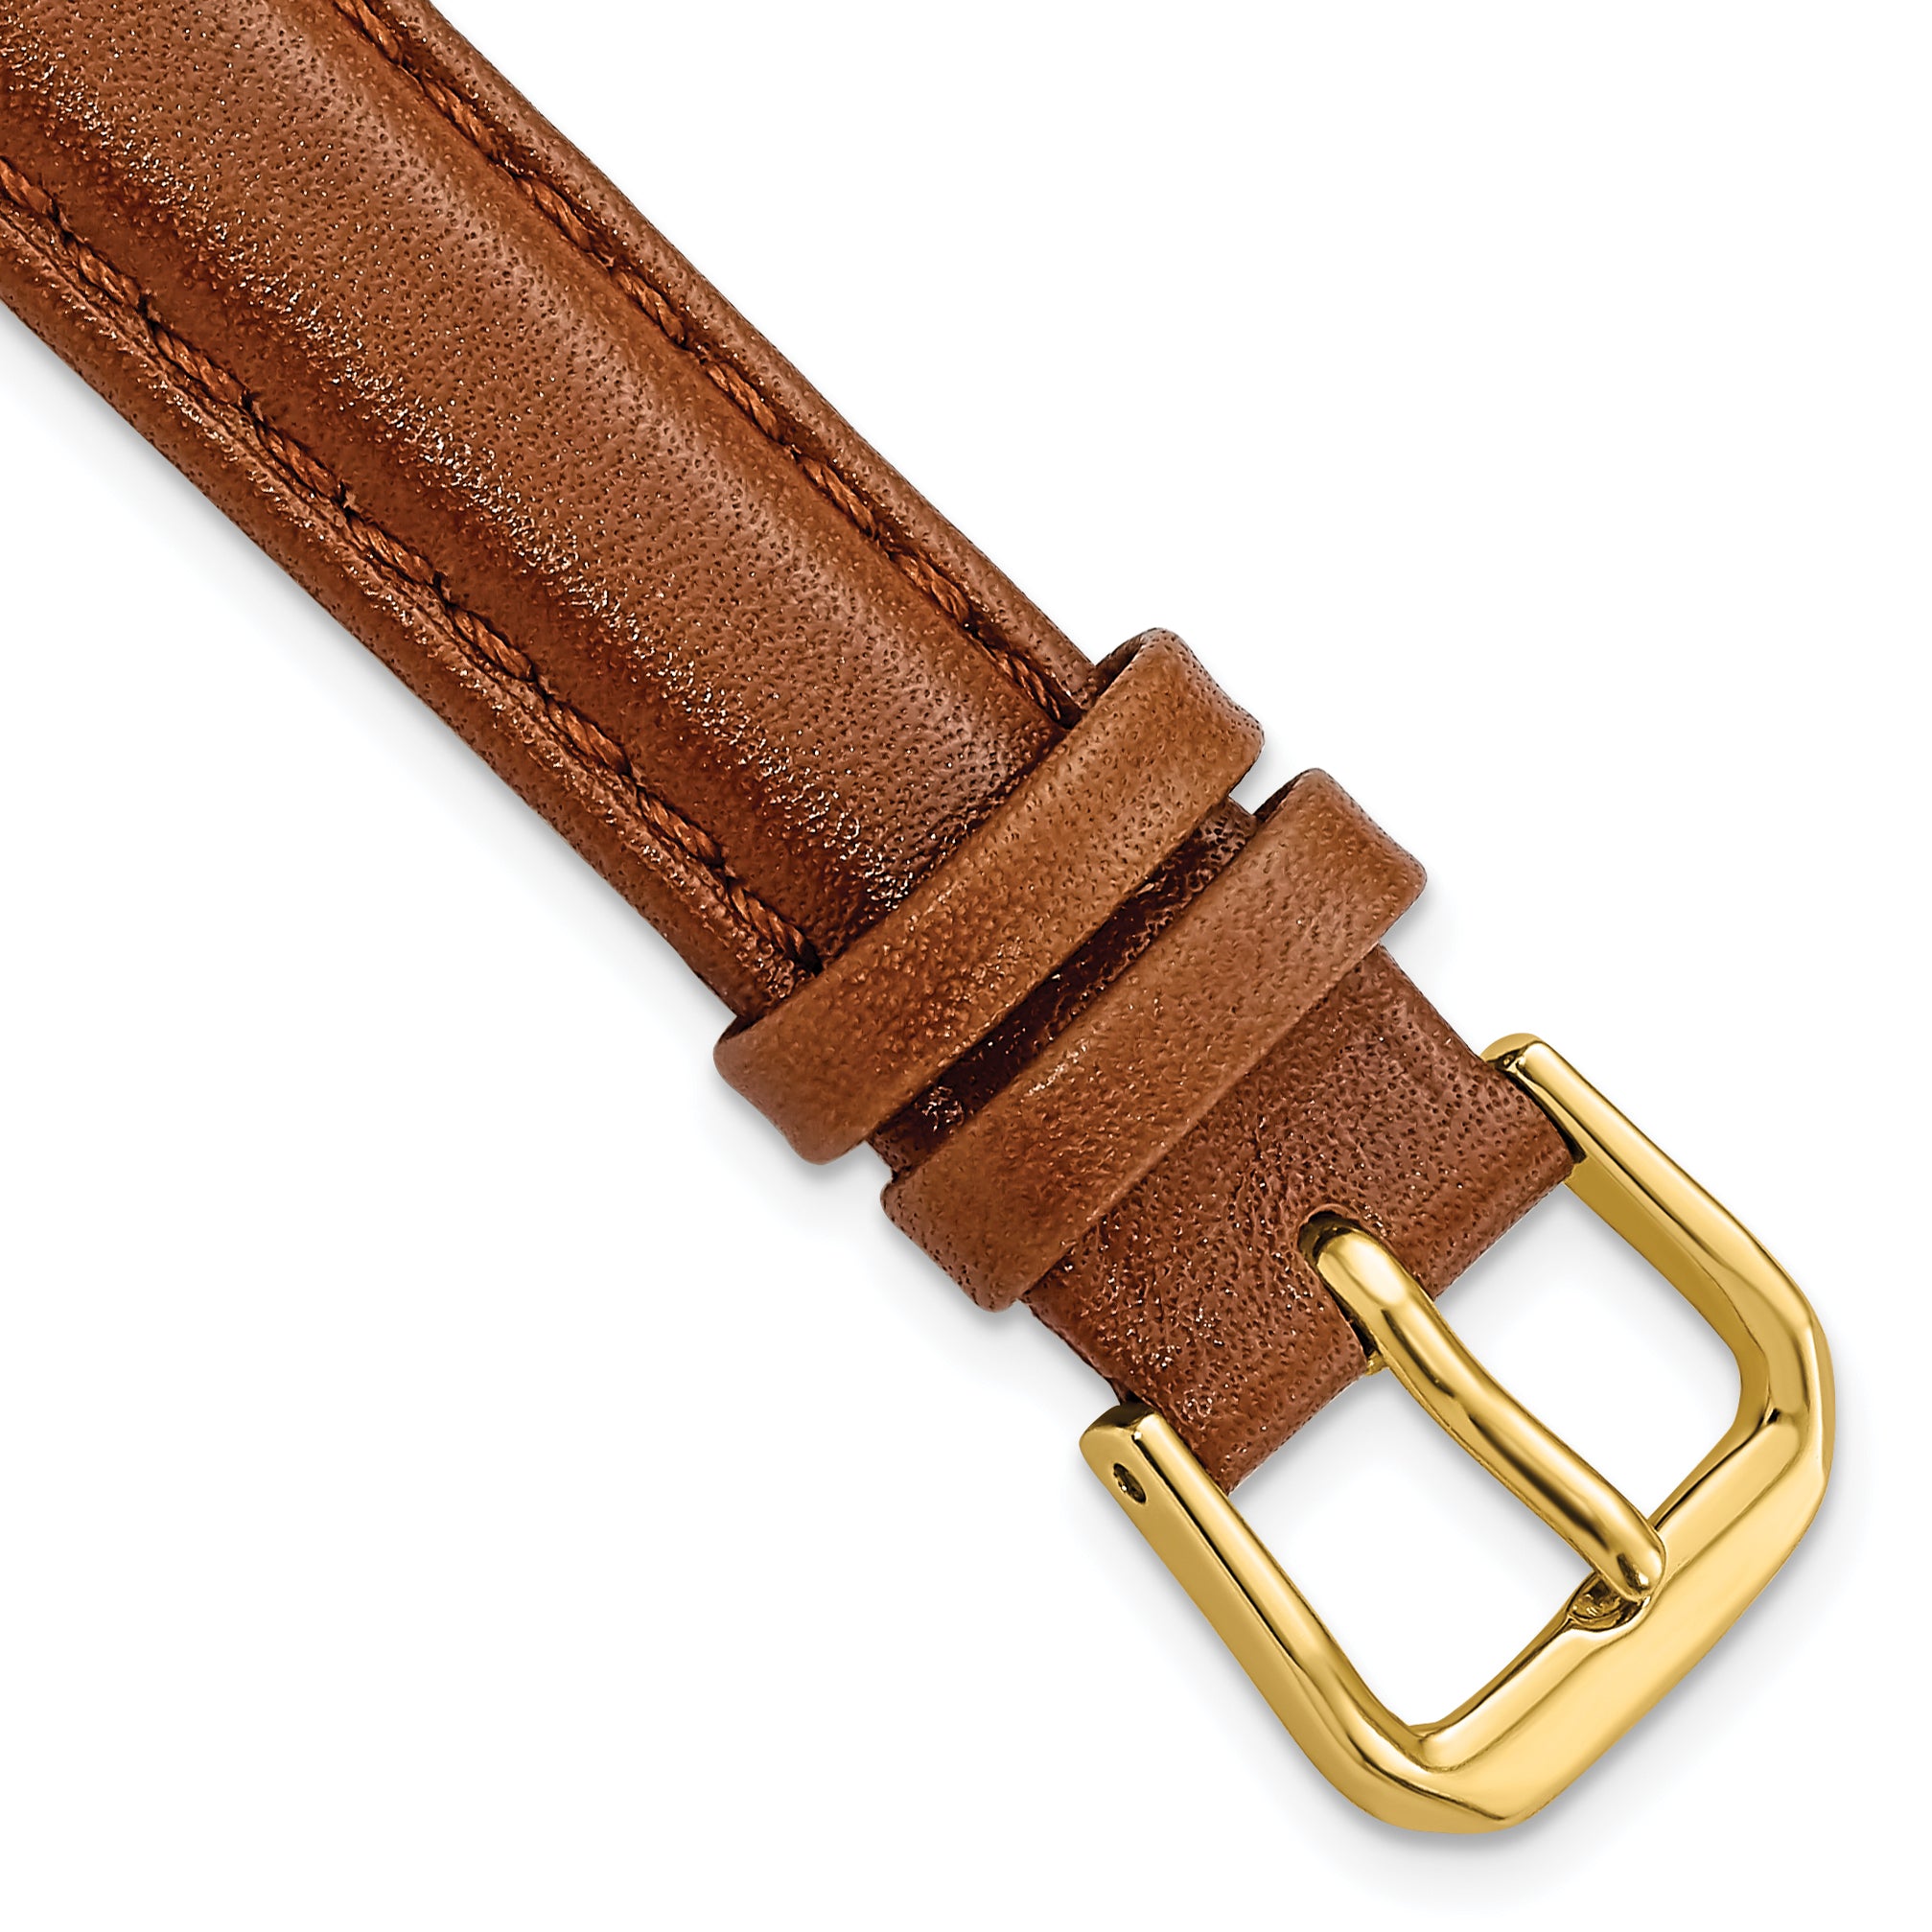 DeBeer 13mm Havana Smooth Leather with Gold-tone Buckle 6.75 inch Watch Band